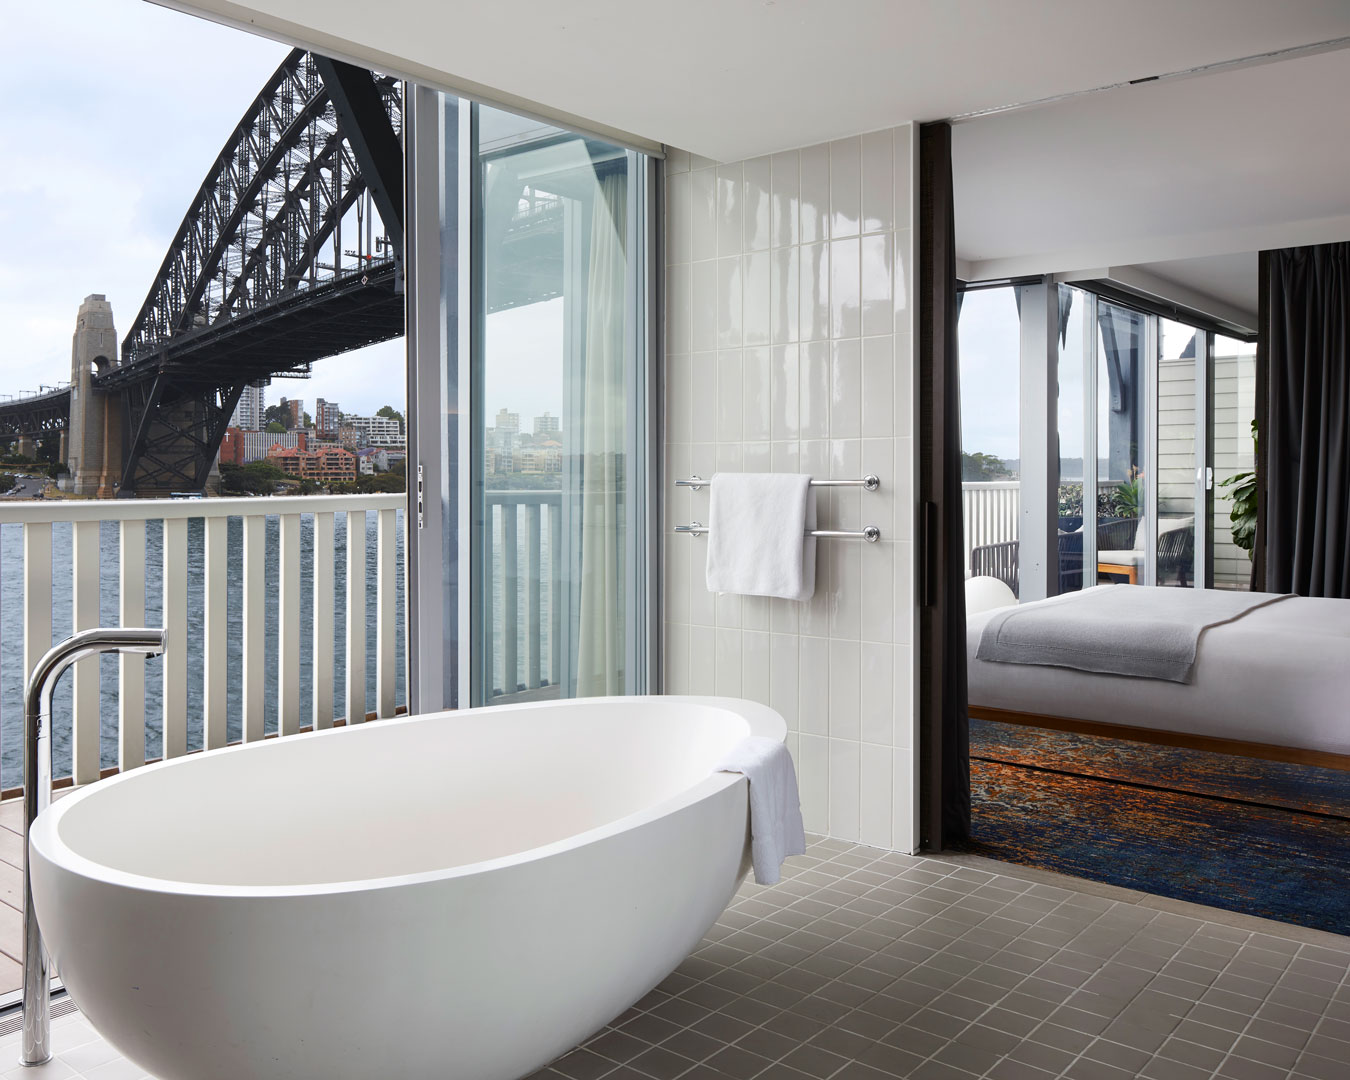 A bathtub in a suite at Pier One, one of the best hotels in Sydney